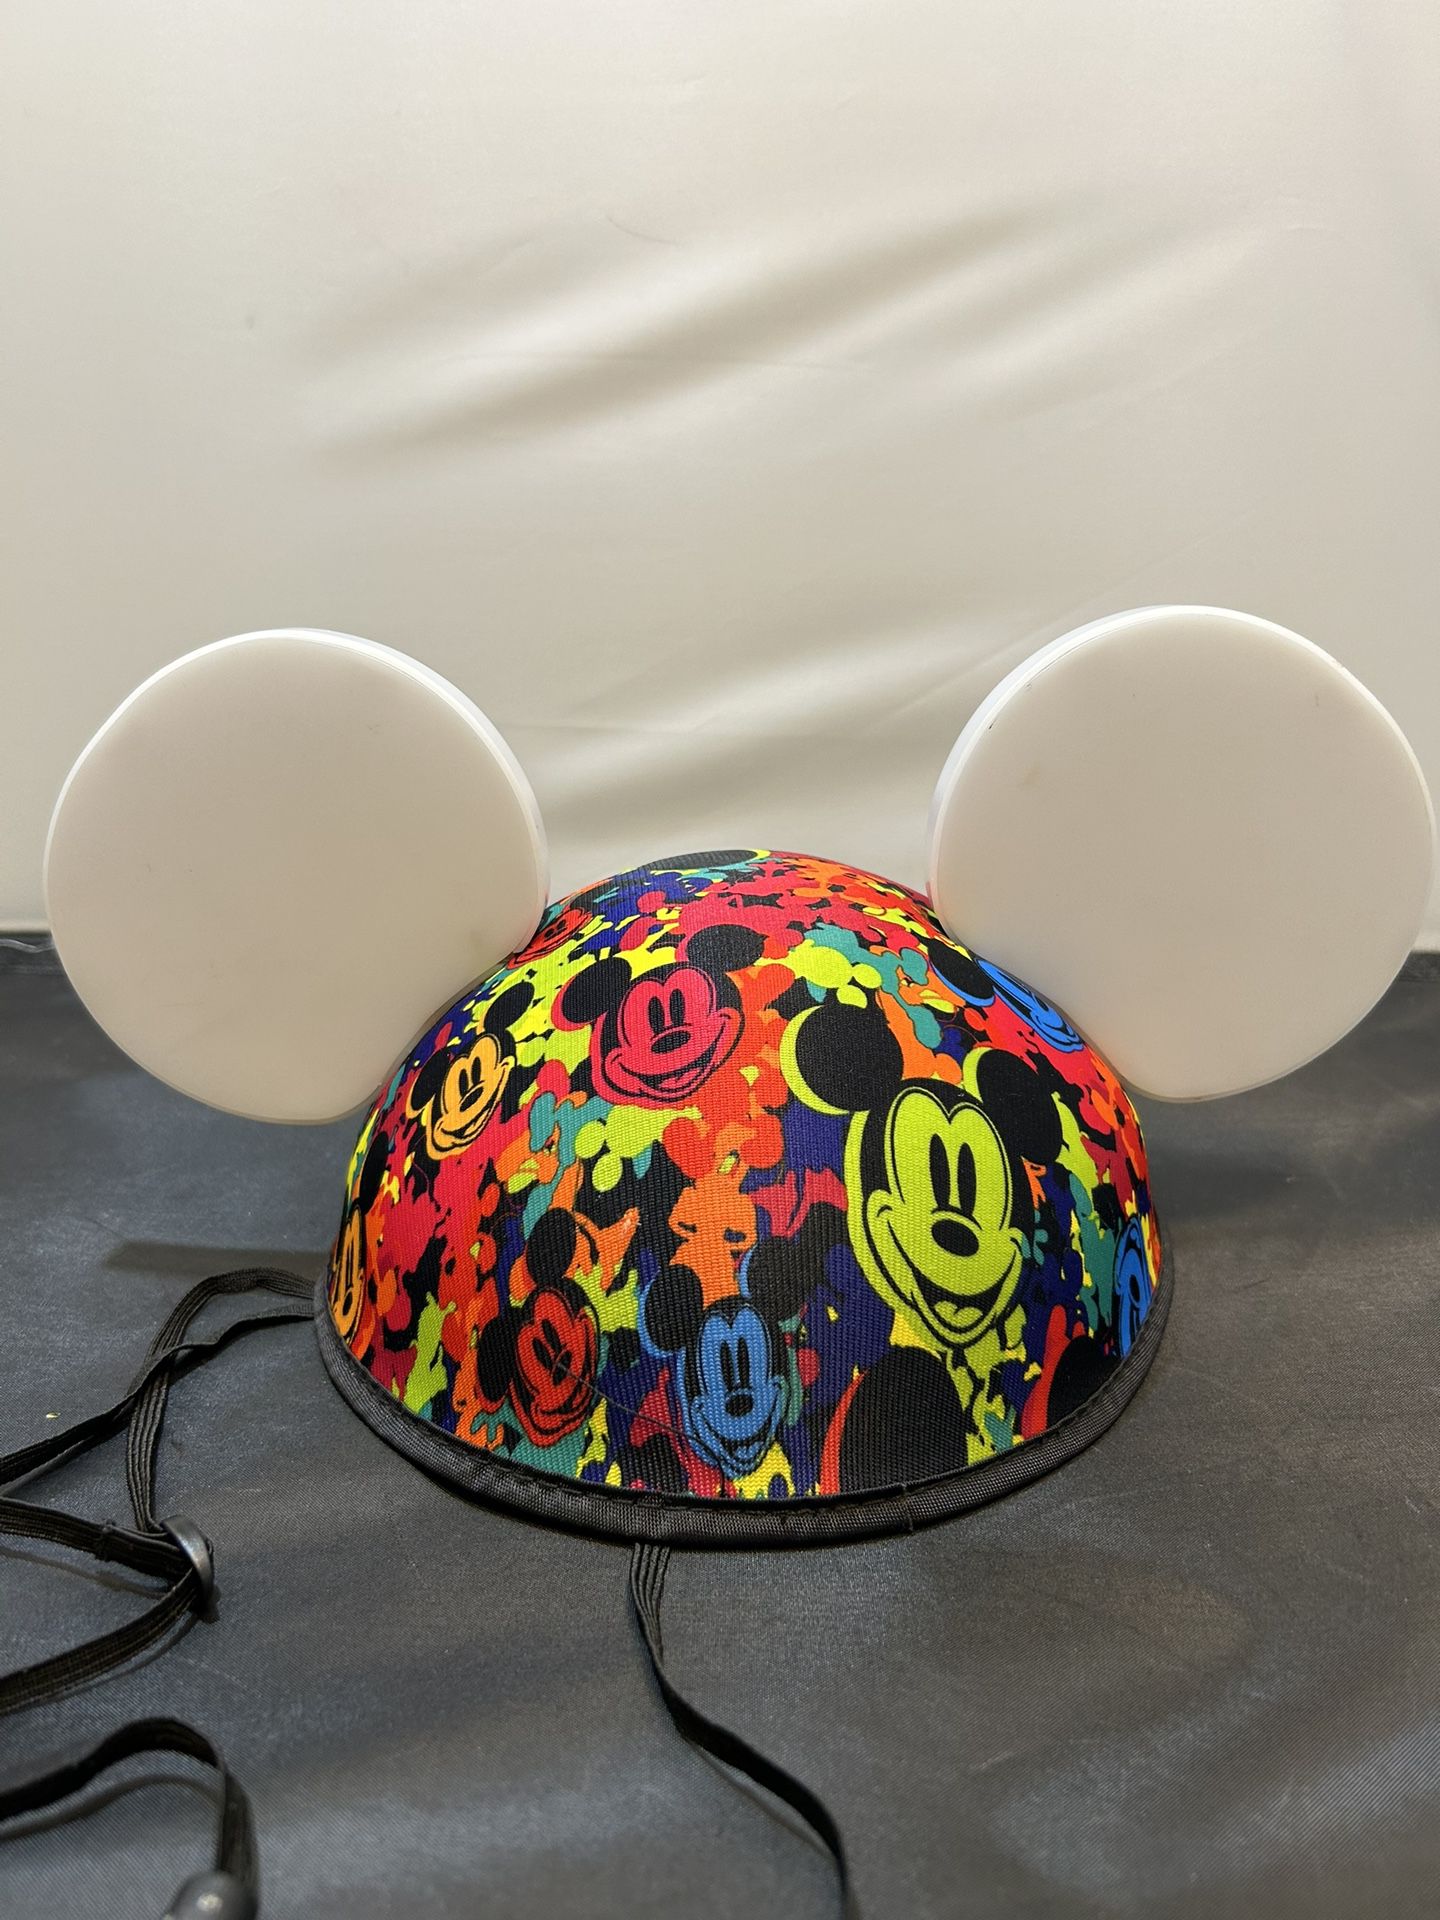 Disney Parks World of Color "Glow With The Show" Mickey Mouse Light Up Ears